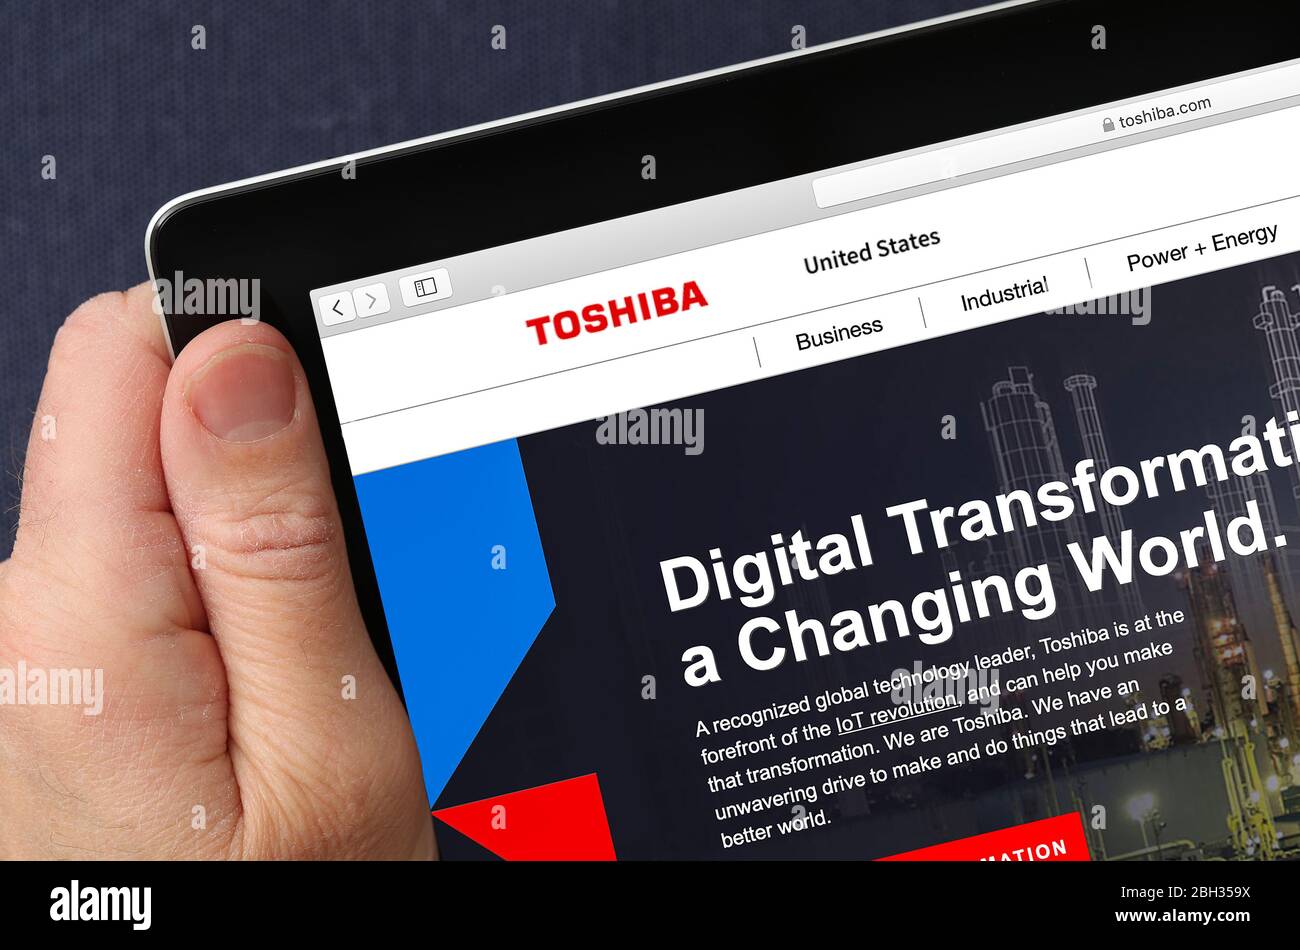 Toshiba website viewed on an iPad (editorial use only) Stock Photo